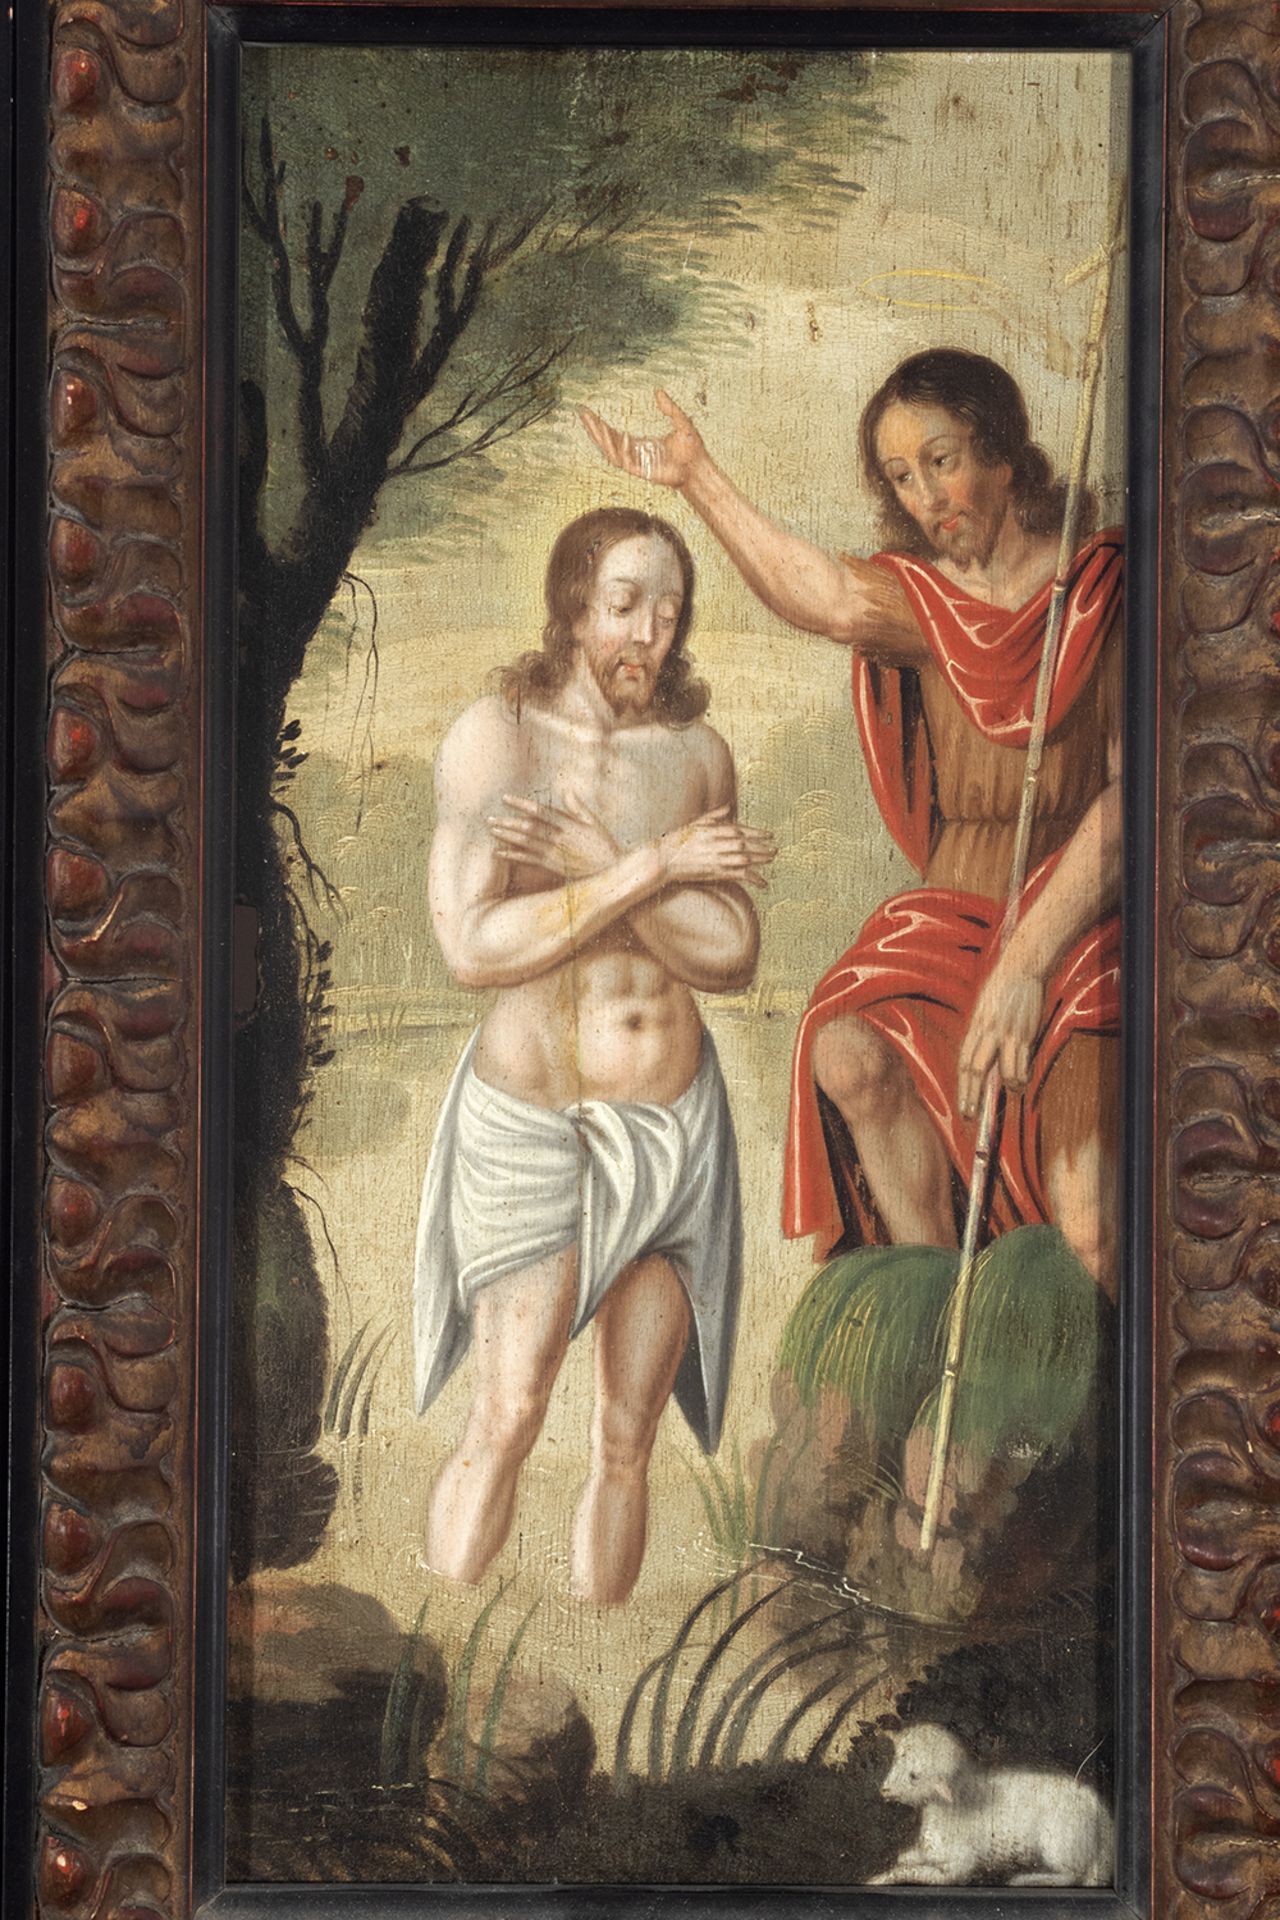 Flemish school, 17th century. The Baptism of Christ and The Visitation. - Image 3 of 9